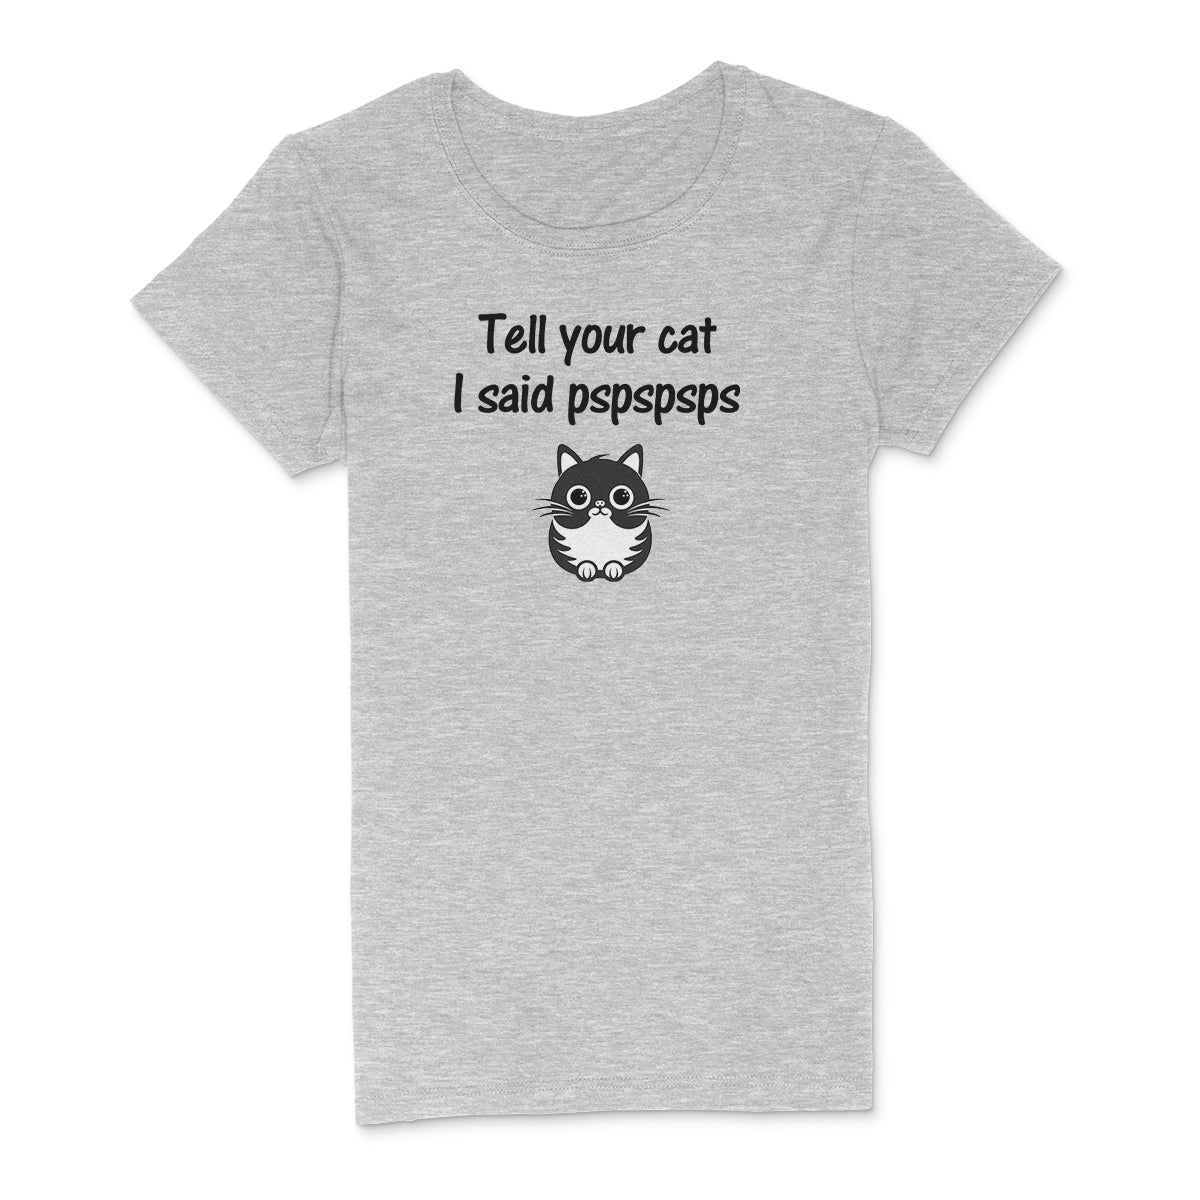 "Tell Your Cat" Premium Midweight Ringspun Cotton T-Shirt - Mens/Womens Fits